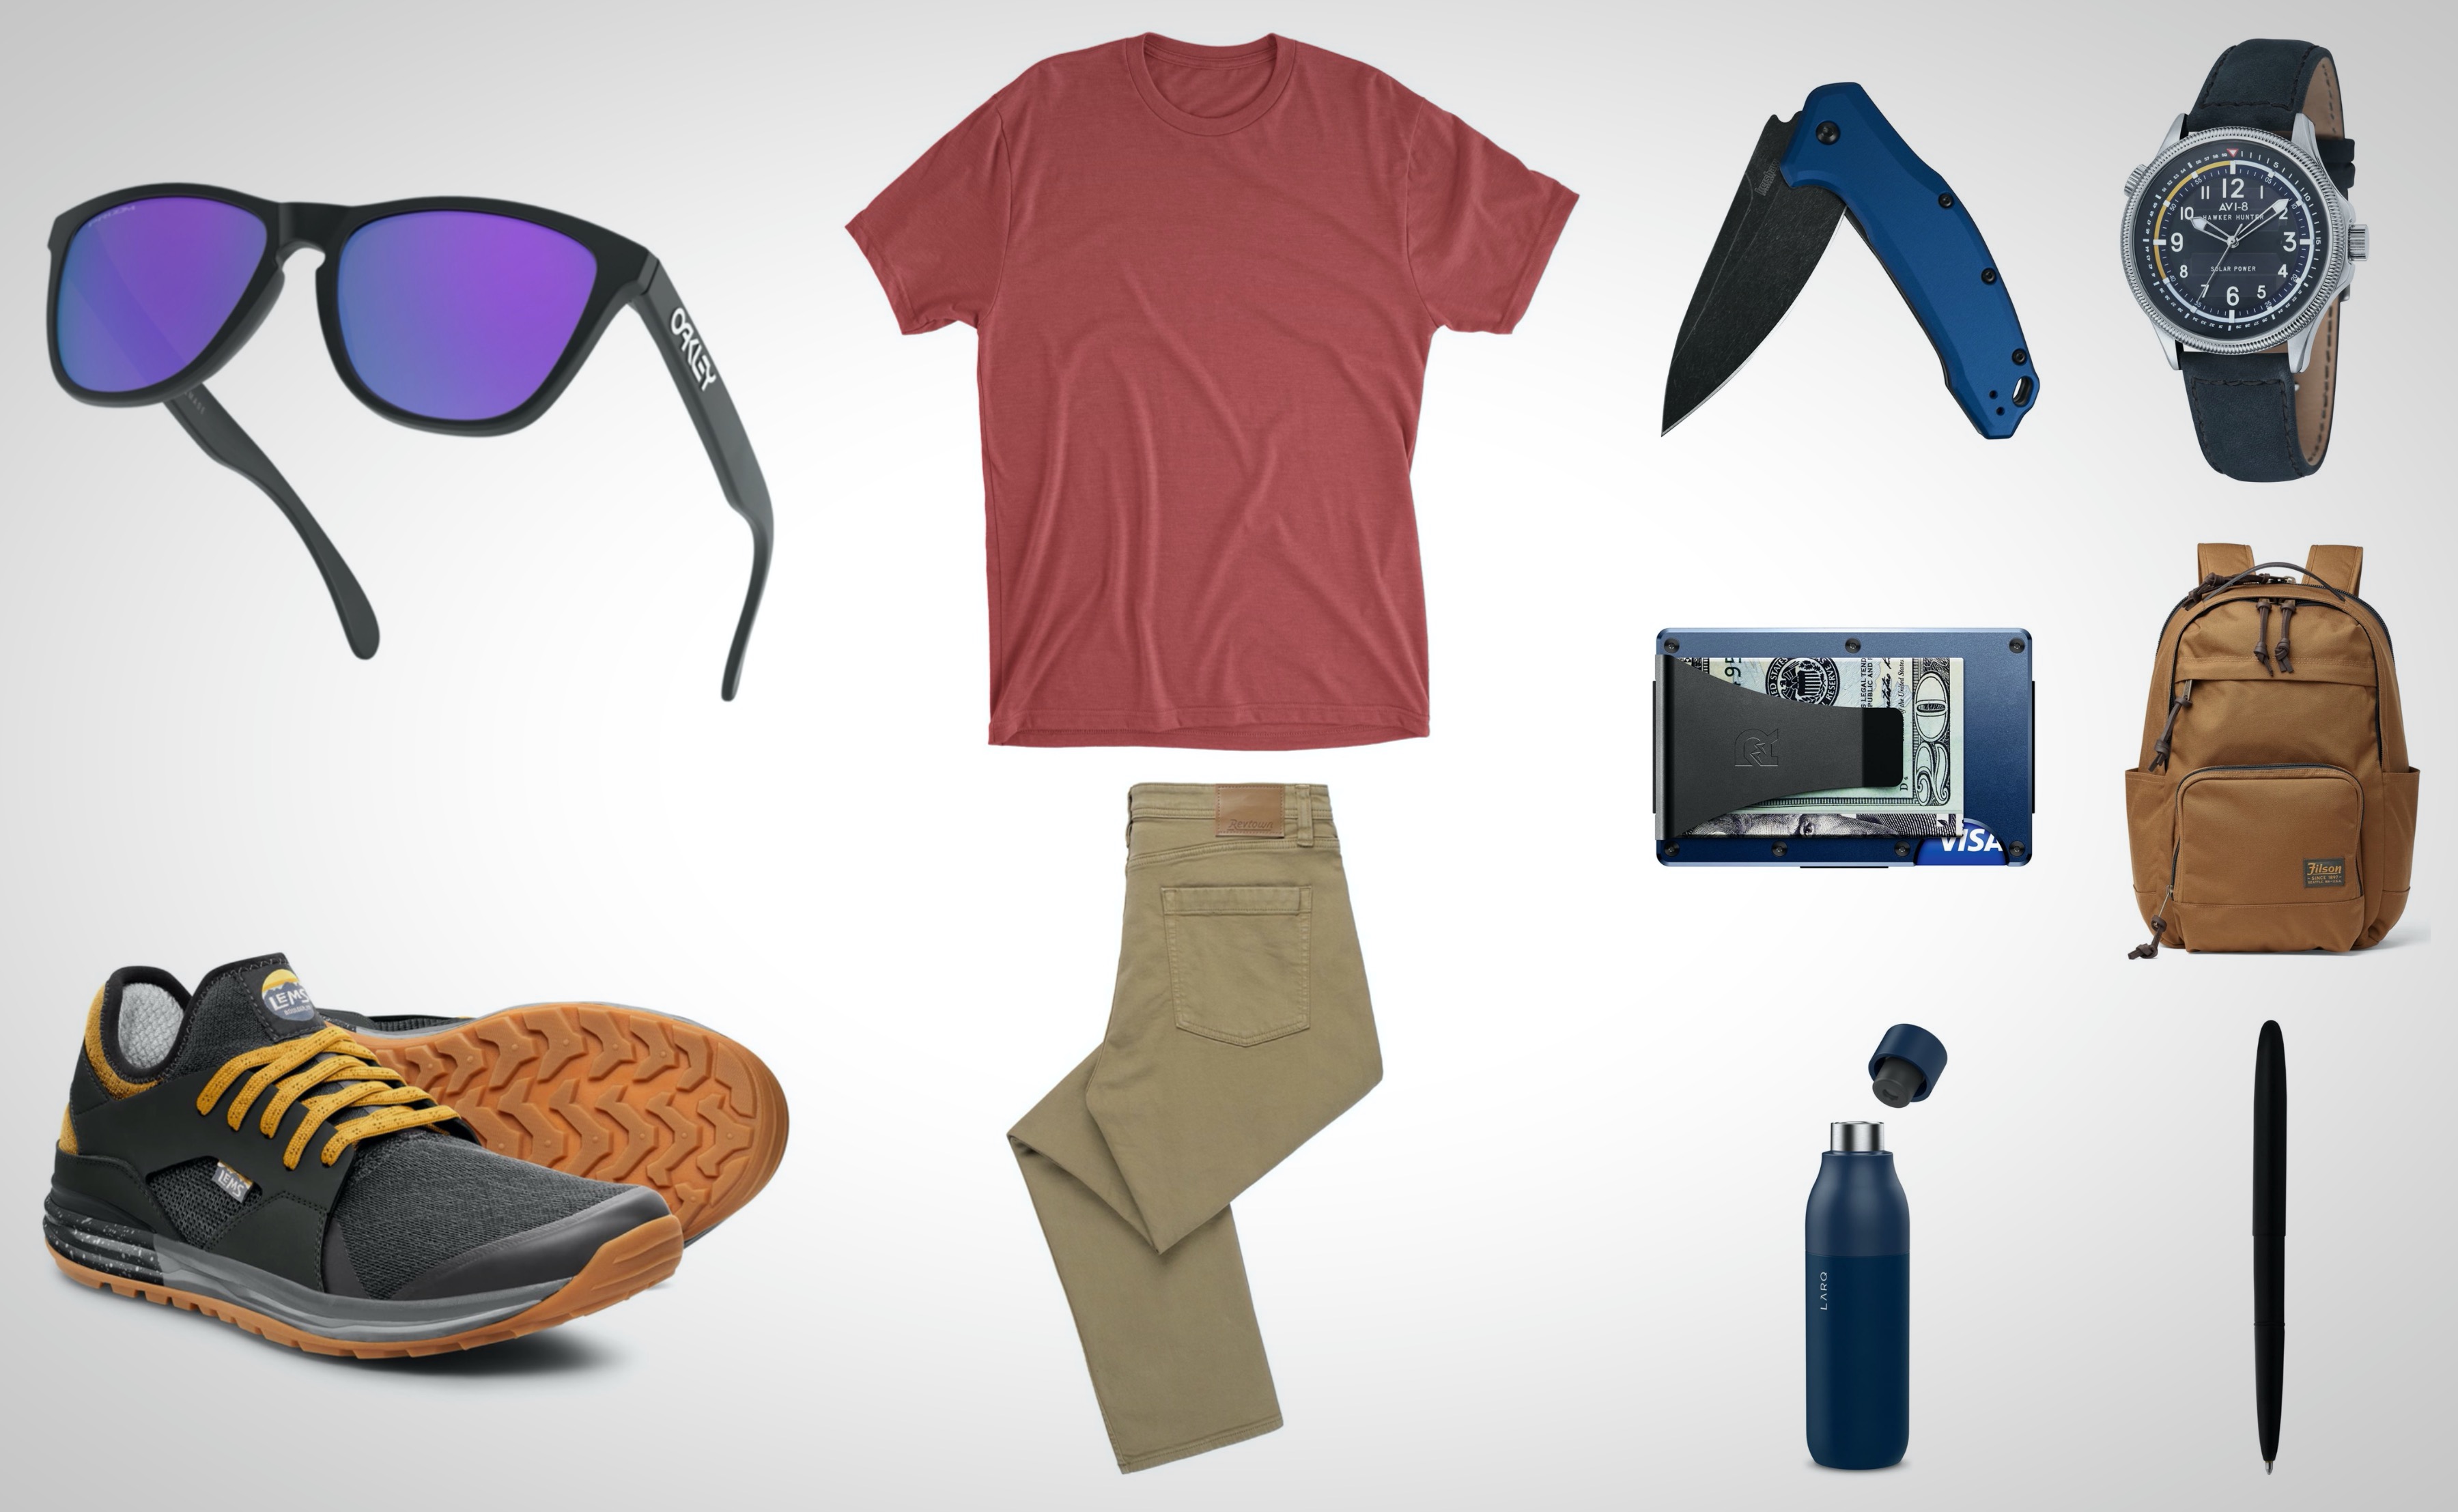 Everyday Essentials To Freshen Up Your Look - BroBible